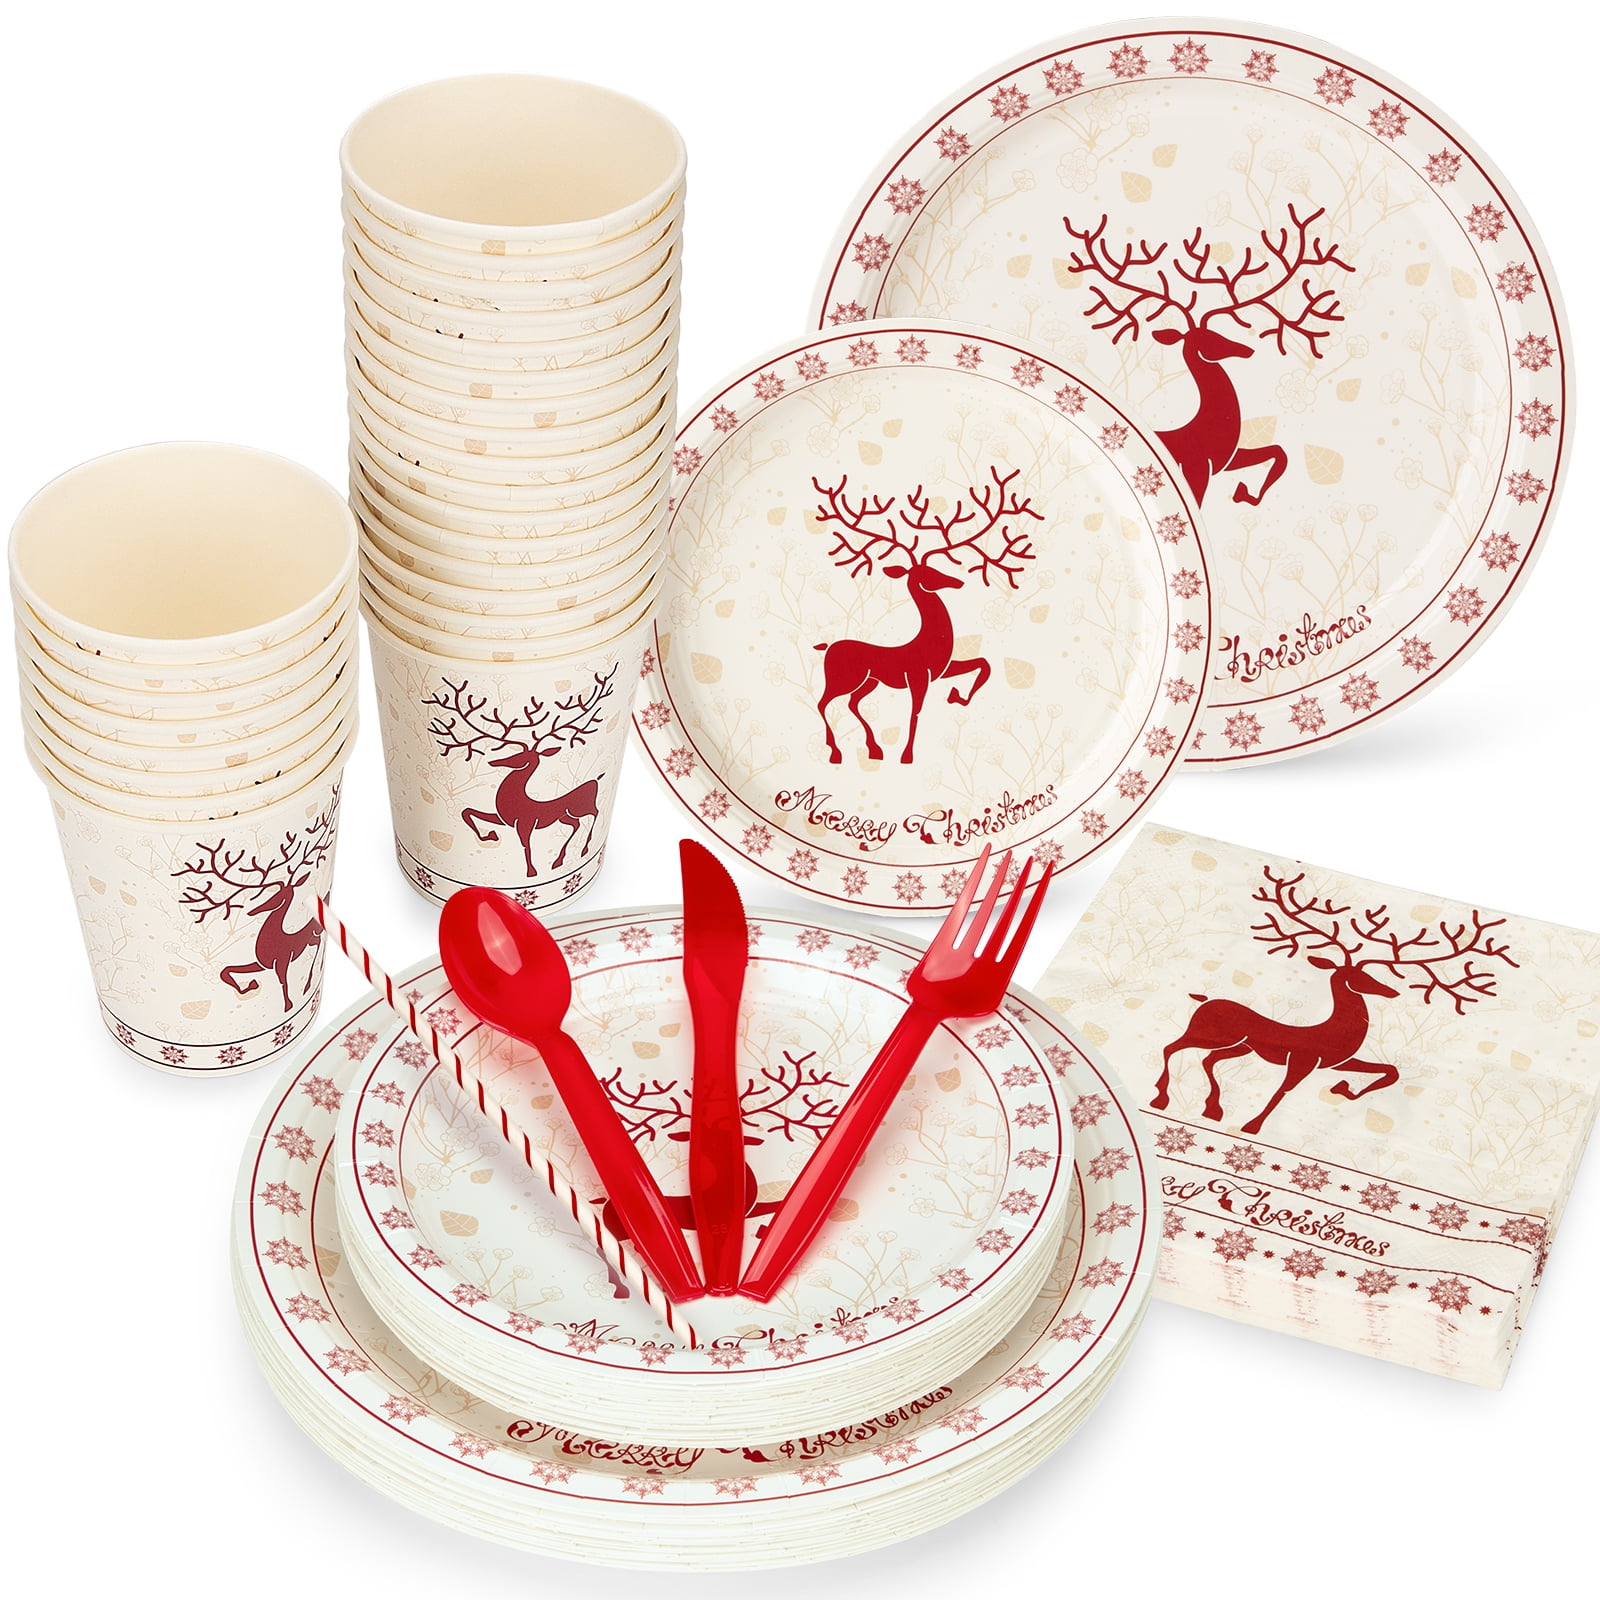 Christmas Party Supplies Paper Dinnerware Sets Serves 16 Guests - Disposable  Paper Plates For Dinner & Dessert, Reindeer Napkins, Paper Christmas Tree  Cups